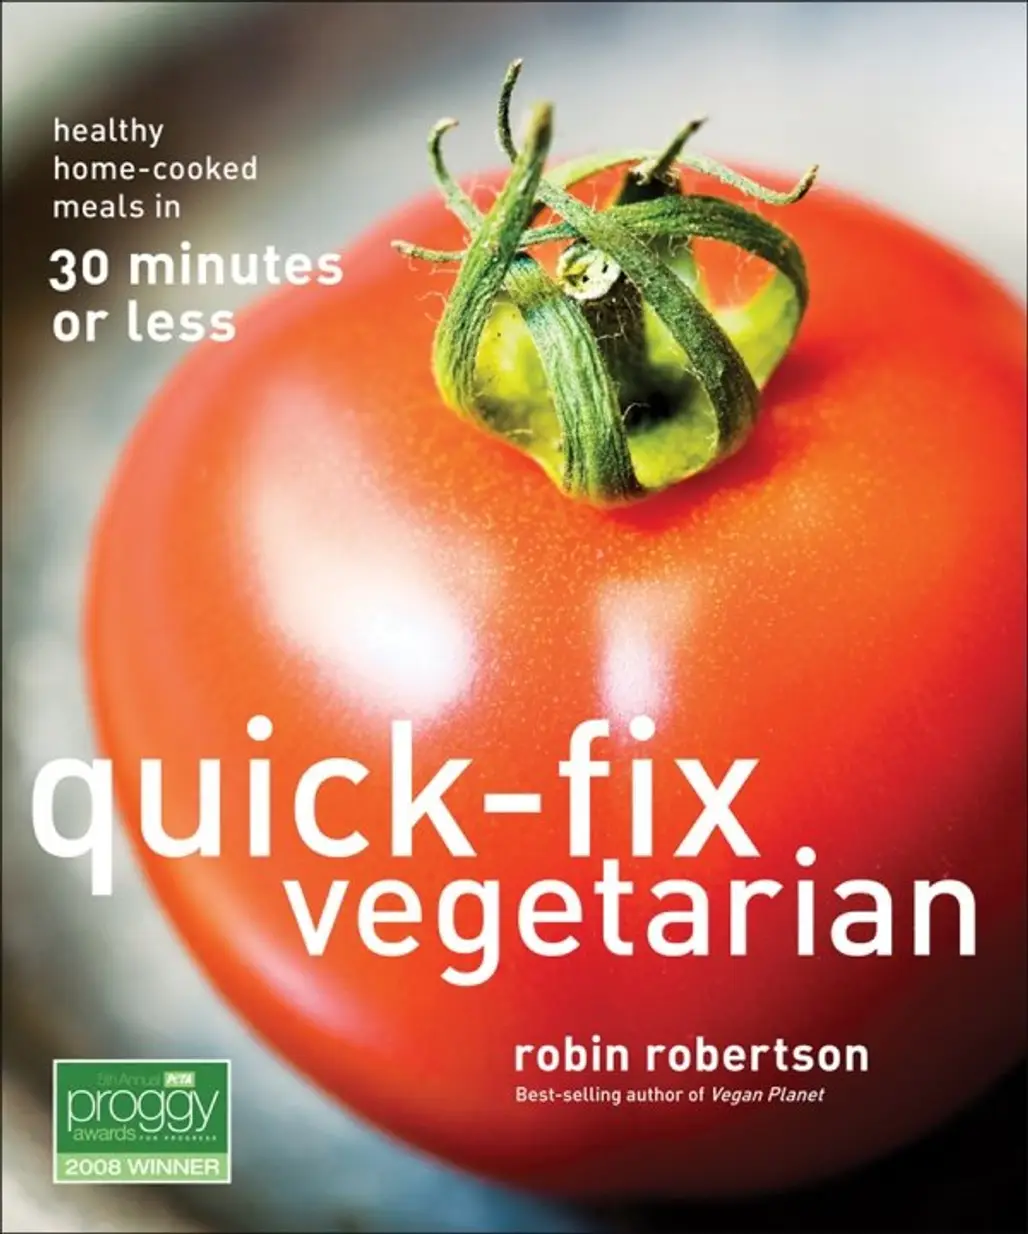 Quick-Fix Vegetarian: Healthy Home-Cooked Meals in 30 Minutes